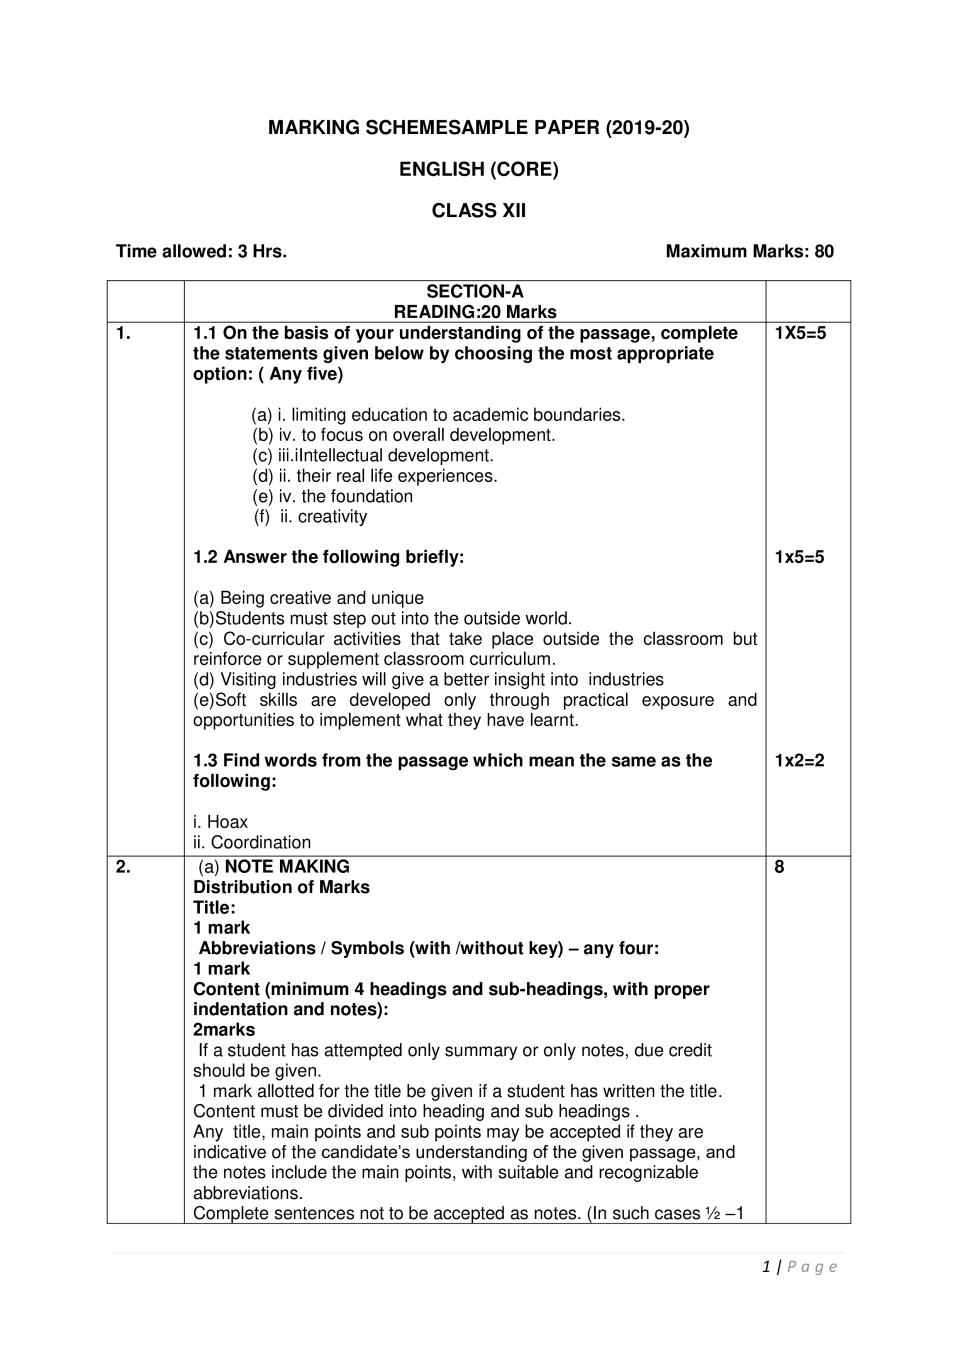 CBSE Class 12 Marking Scheme 2020 for English Core - Page 1